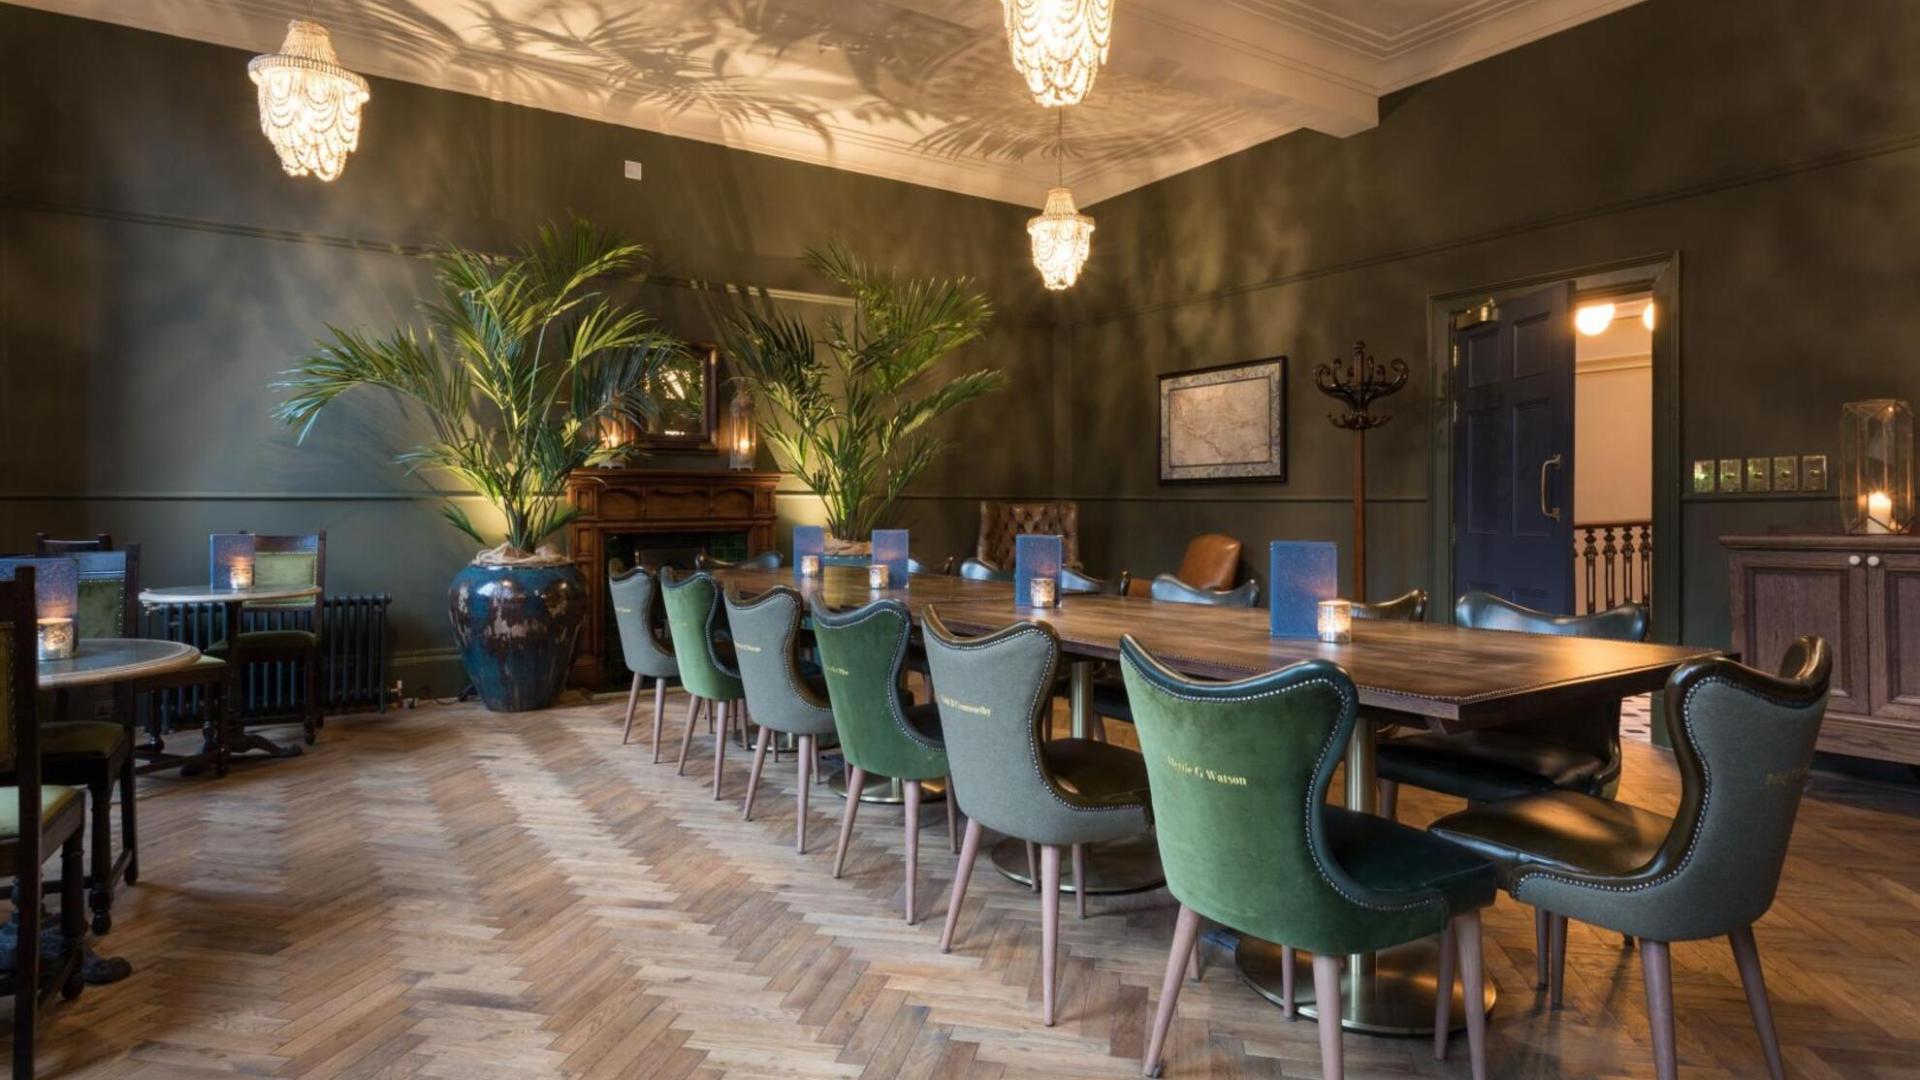 Restaurants with Private Rooms for Hire in Leeds